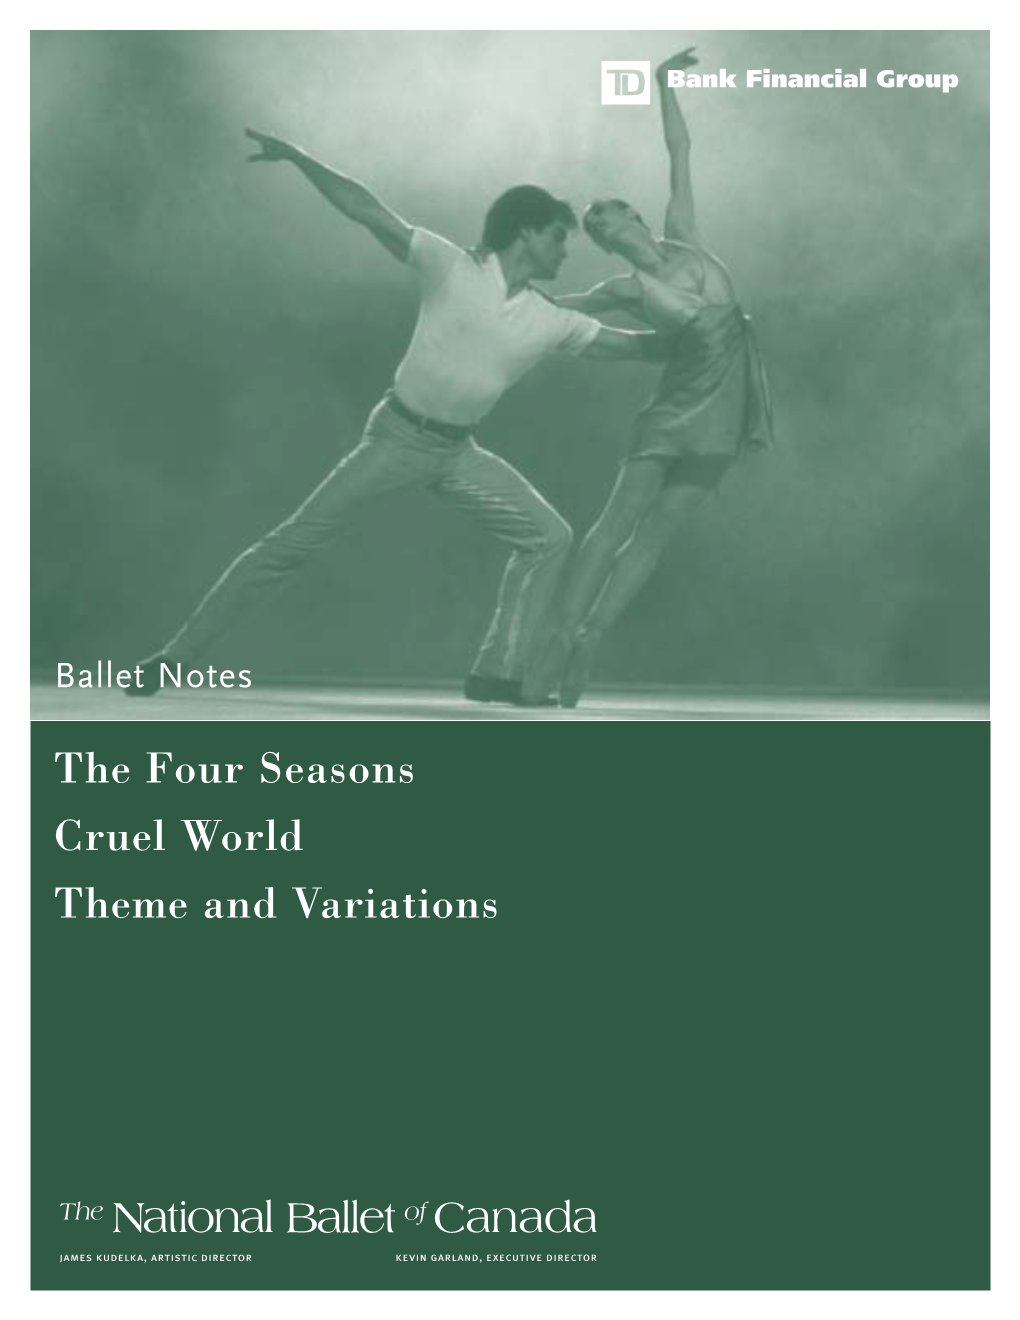 Four Seasons Notes FINAL2.Qxd